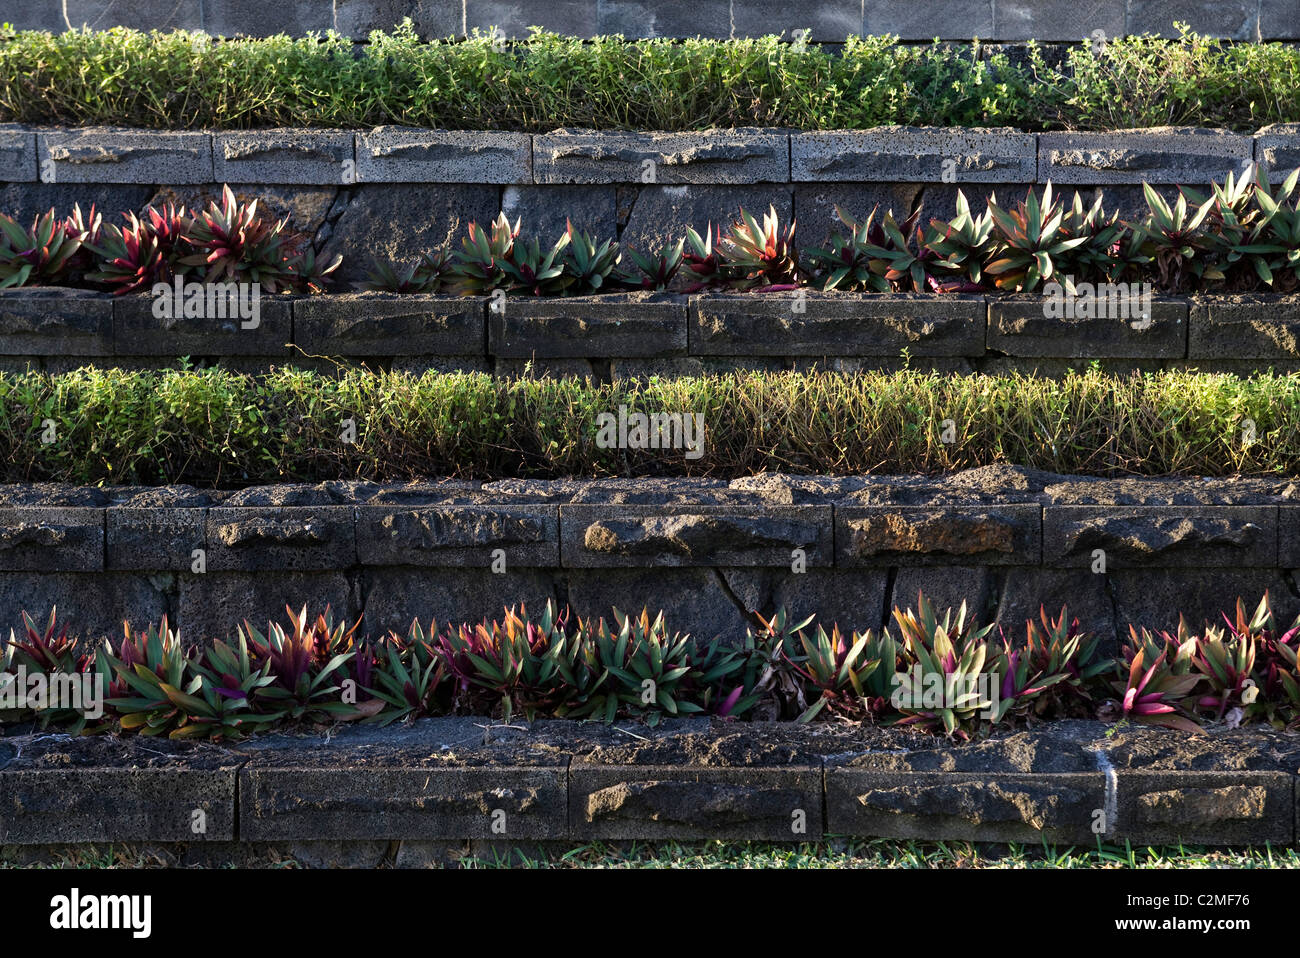 Horizontal stepped planting in sub-tropical gardens Stock Photo